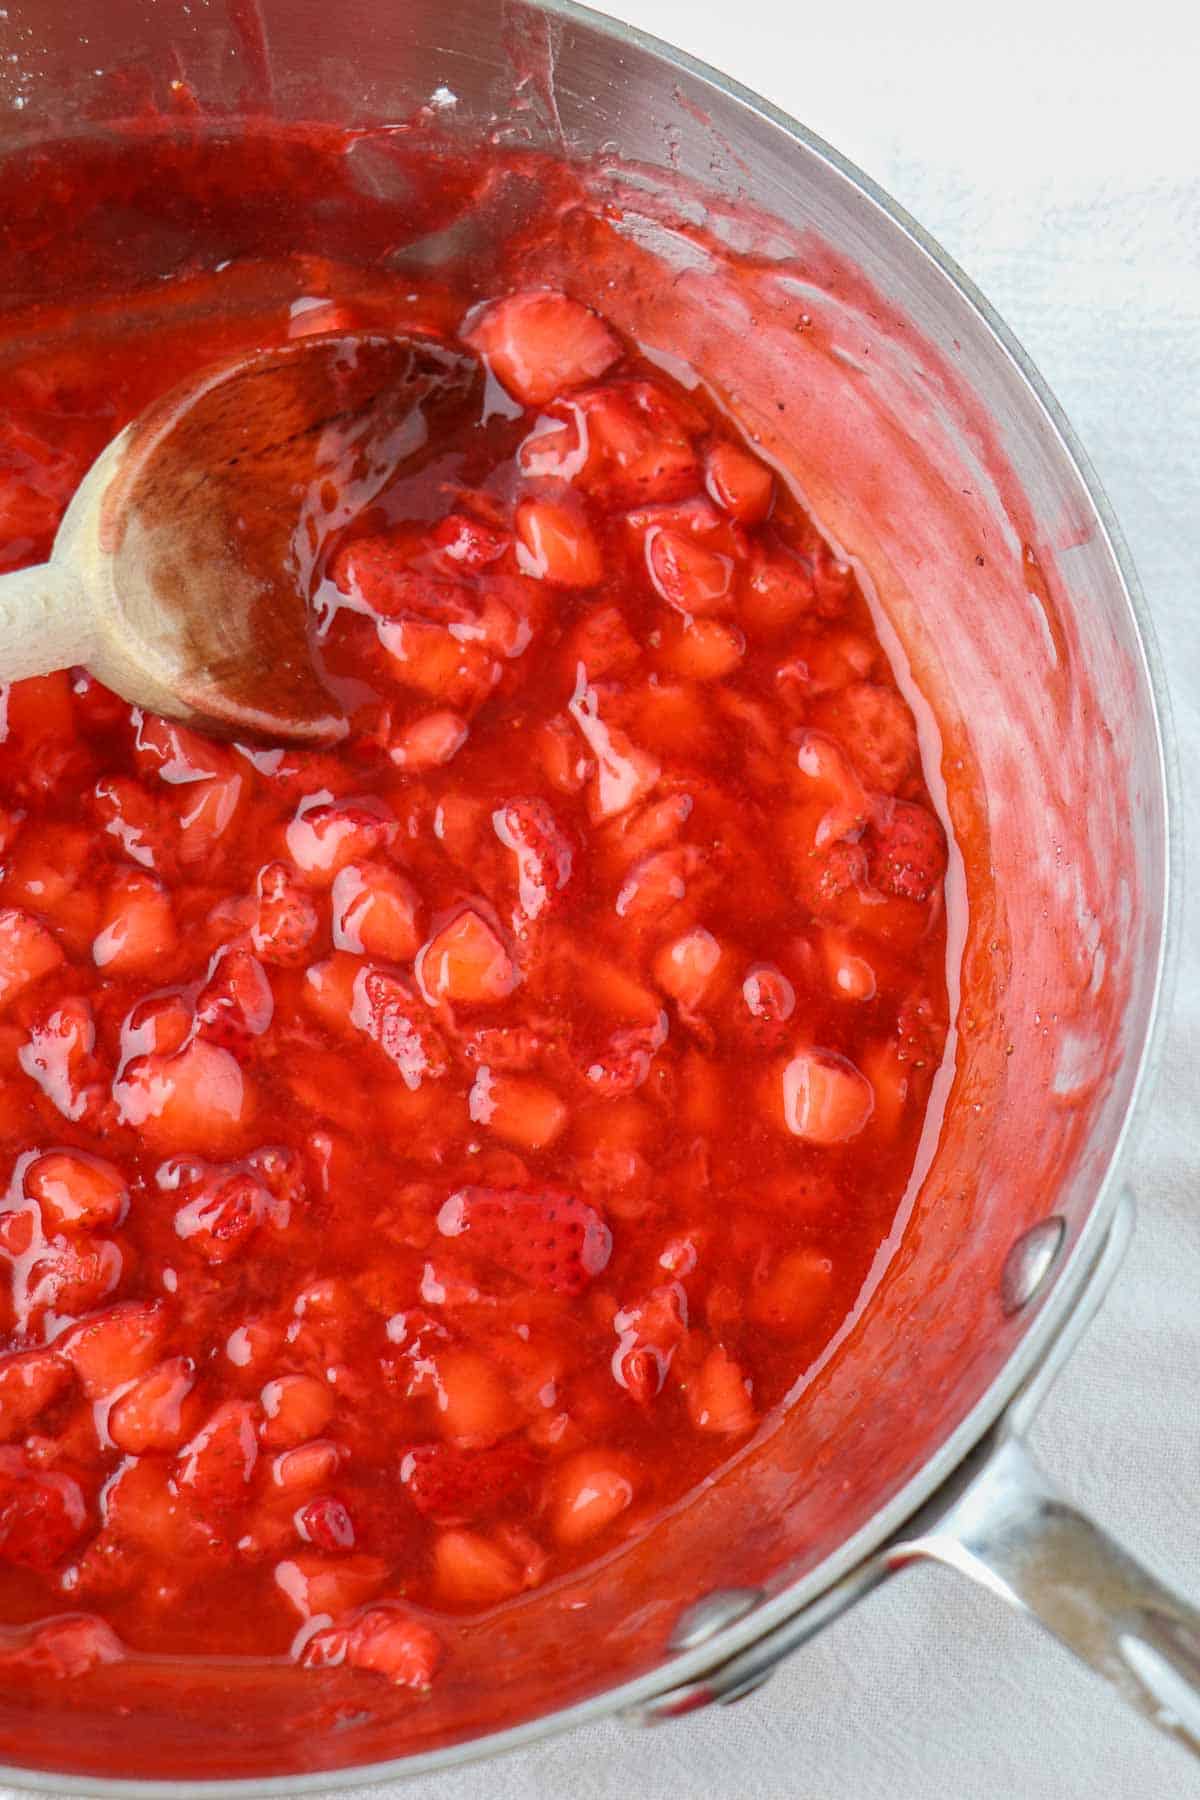 Strawberry filling in a saucepan with a wooden spoon.